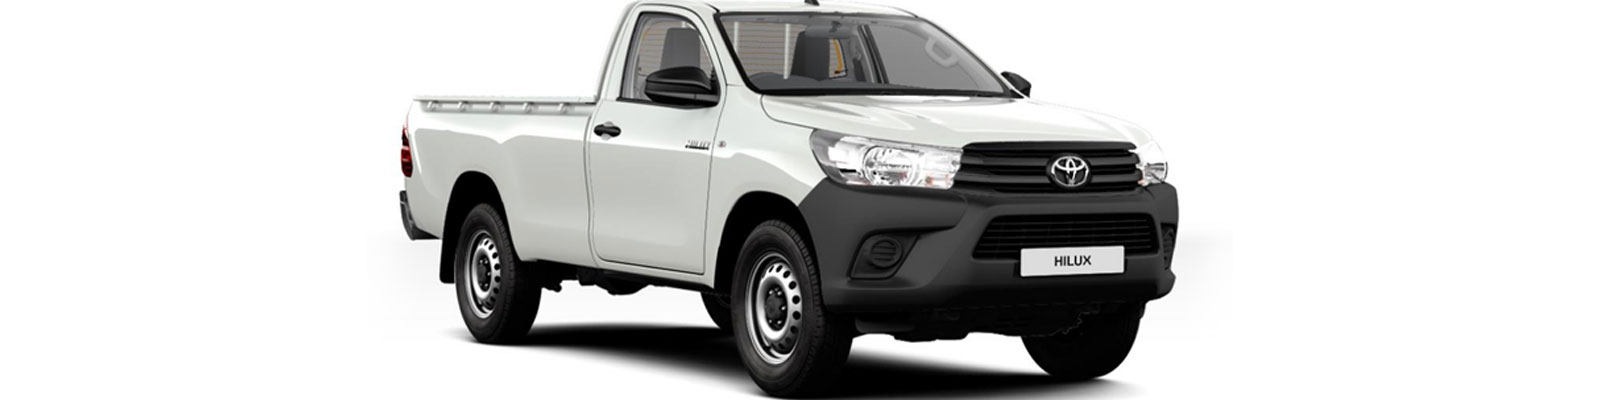 Accessories for Toyota Hilux Single Cab